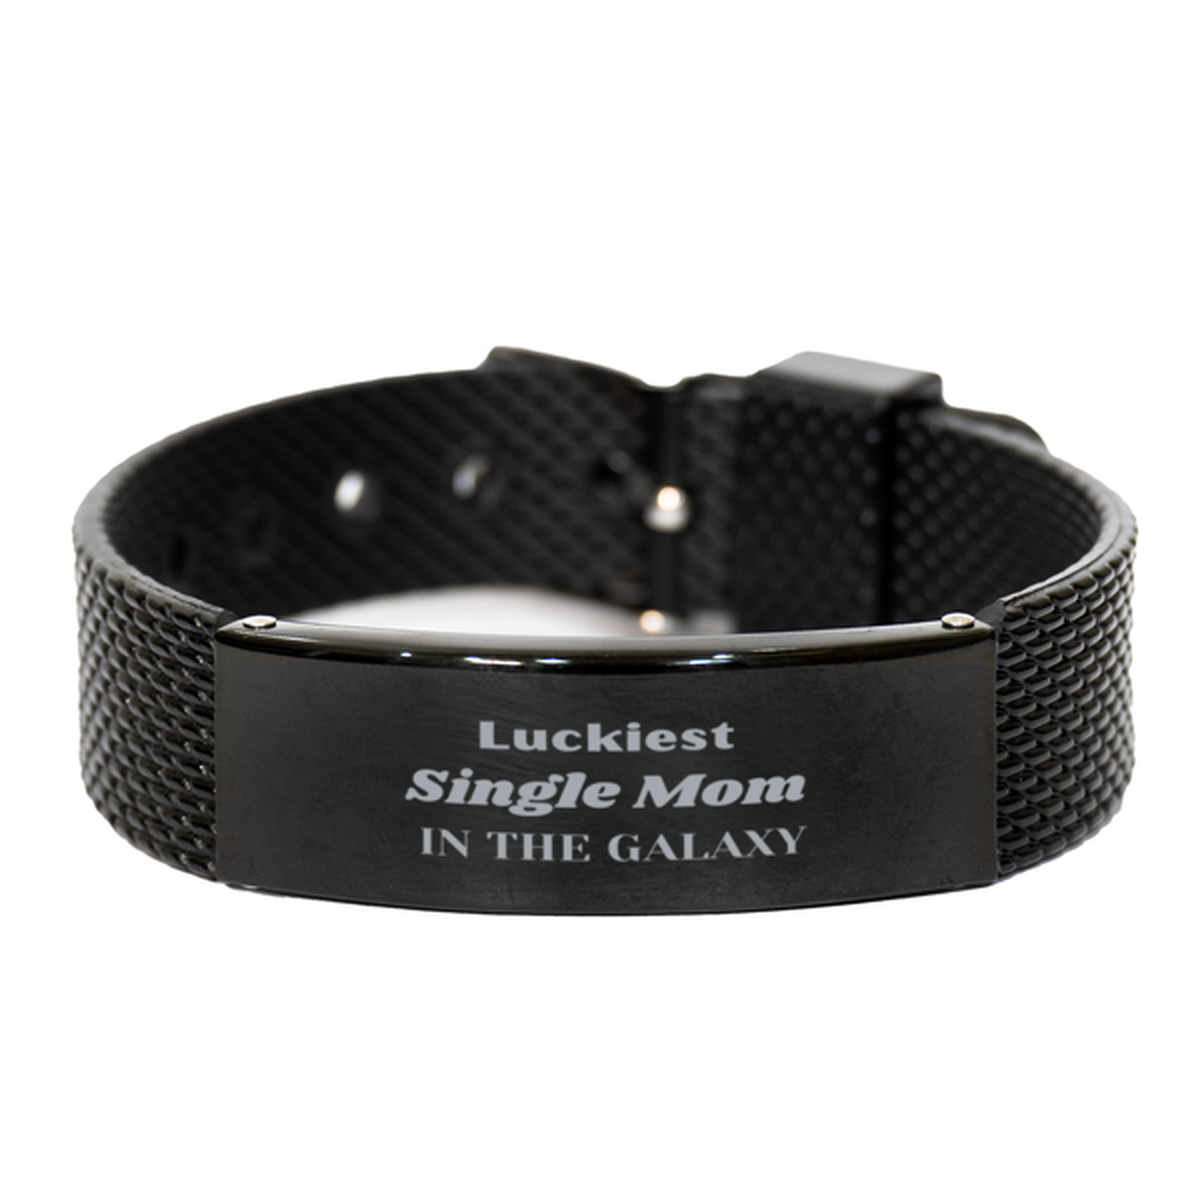 Luckiest Single Mom in the Galaxy, To My Single Mom Engraved Gifts, Christmas Single Mom Black Shark Mesh Bracelet Gifts, X-mas Birthday Unique Gifts For Single Mom Men Women